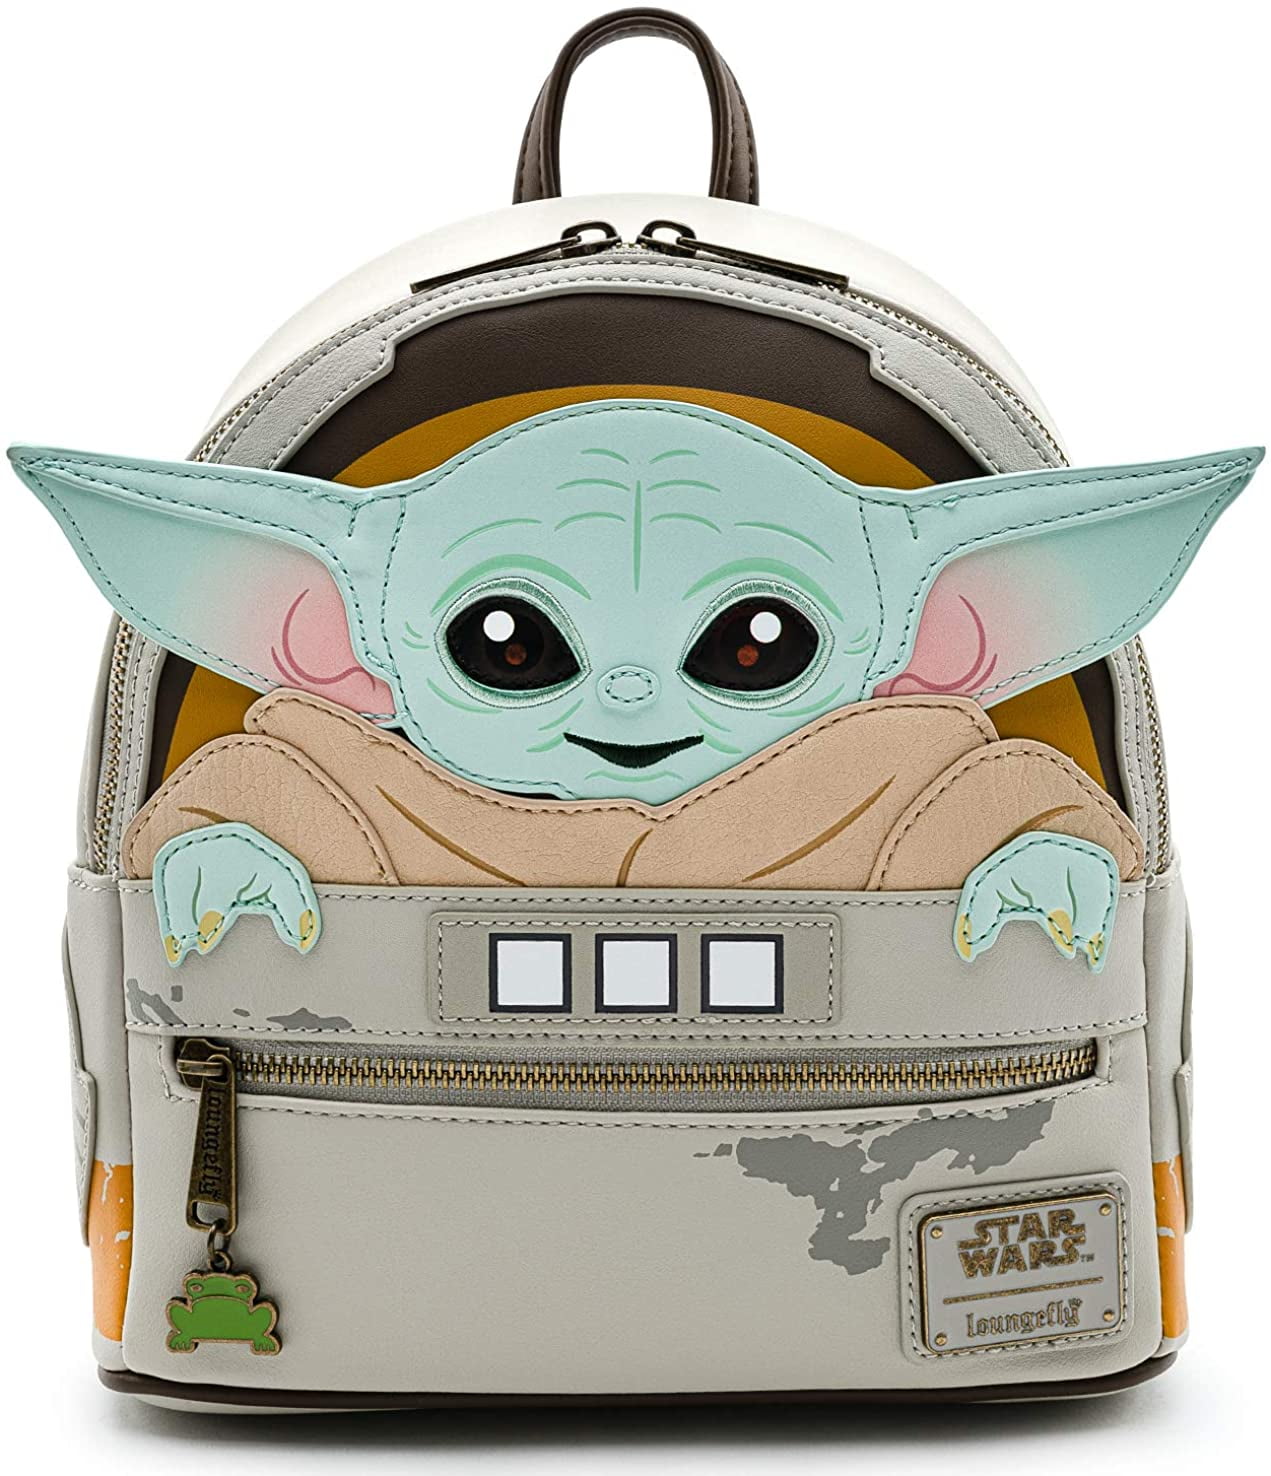 Baby Yoda The child Star wars Mini Satchal Messenger Sack Small Pouch Adjustable 